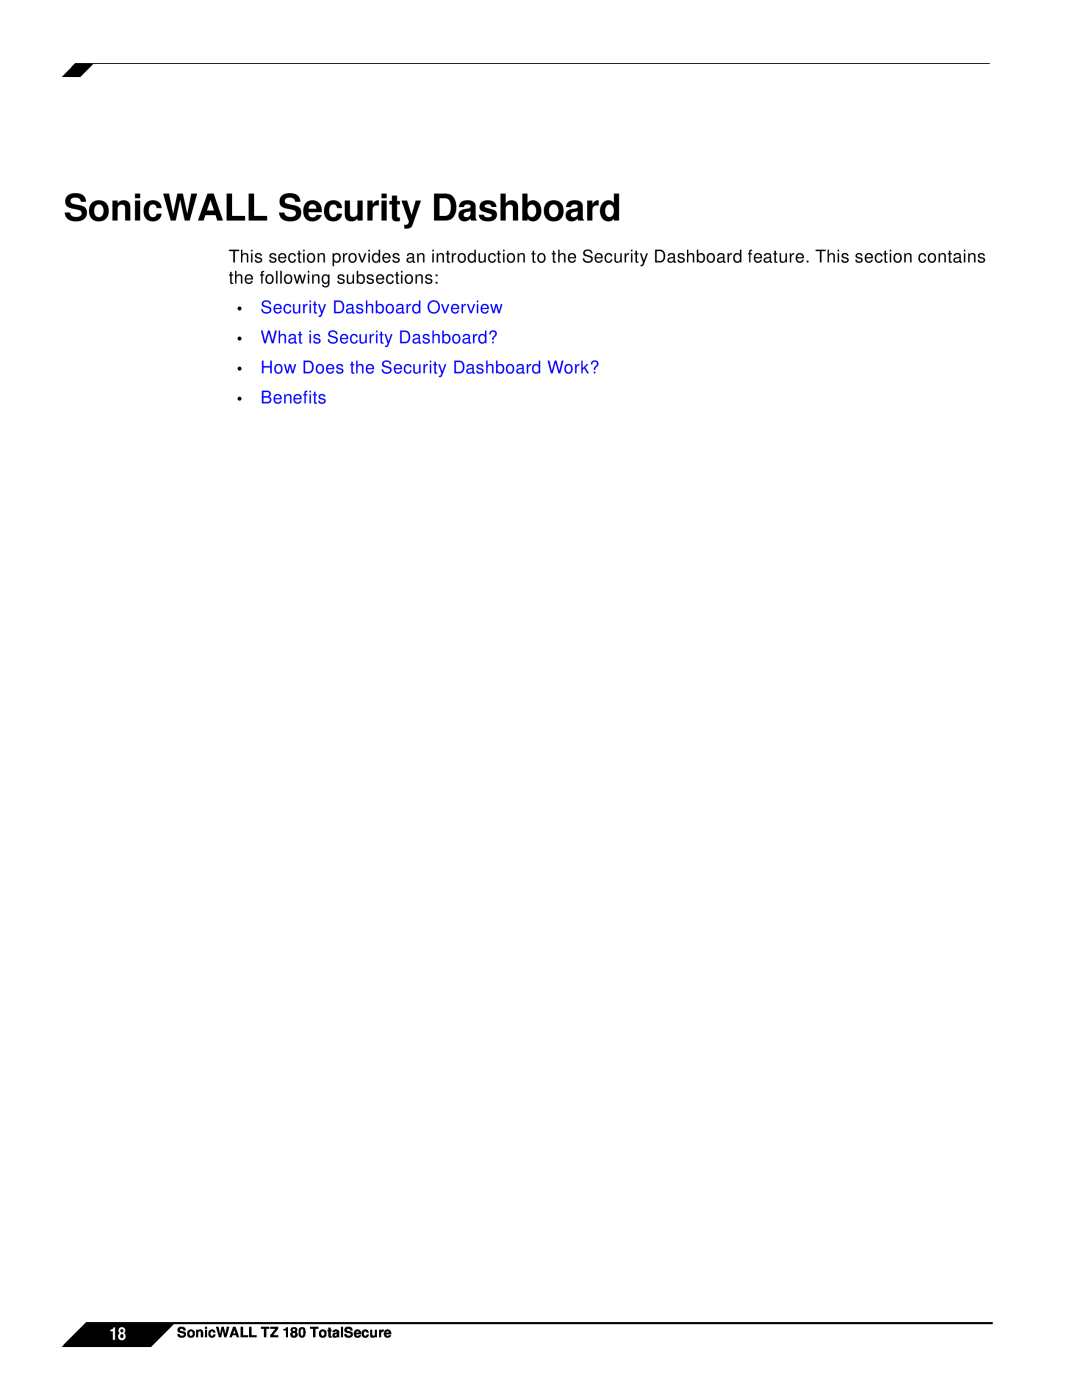 SonicWALL TZ 180 manual SonicWALL Security Dashboard, Security Dashboard Overview, What is Security Dashboard? 